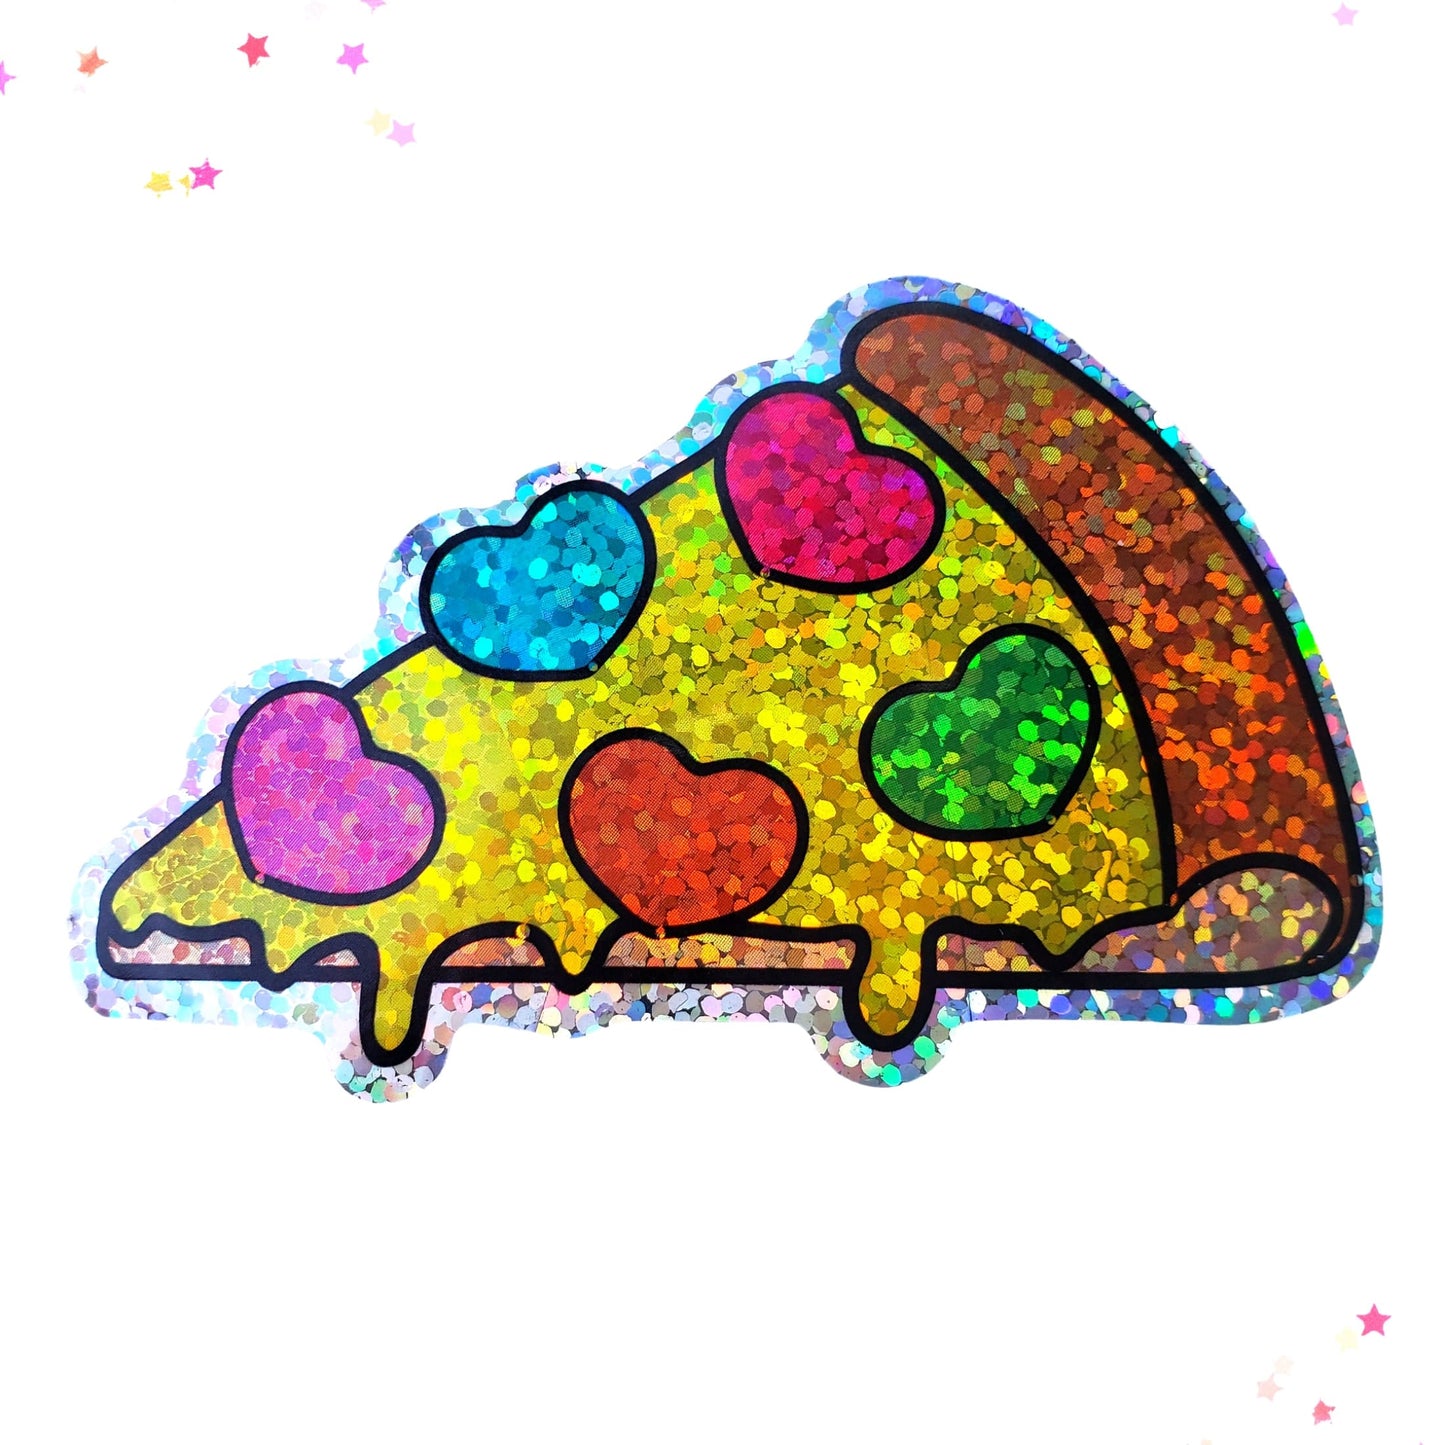 Premium Sticker - Sparkly Holographic Glitter Colorful Pizza from Confetti Kitty, Only 2.00